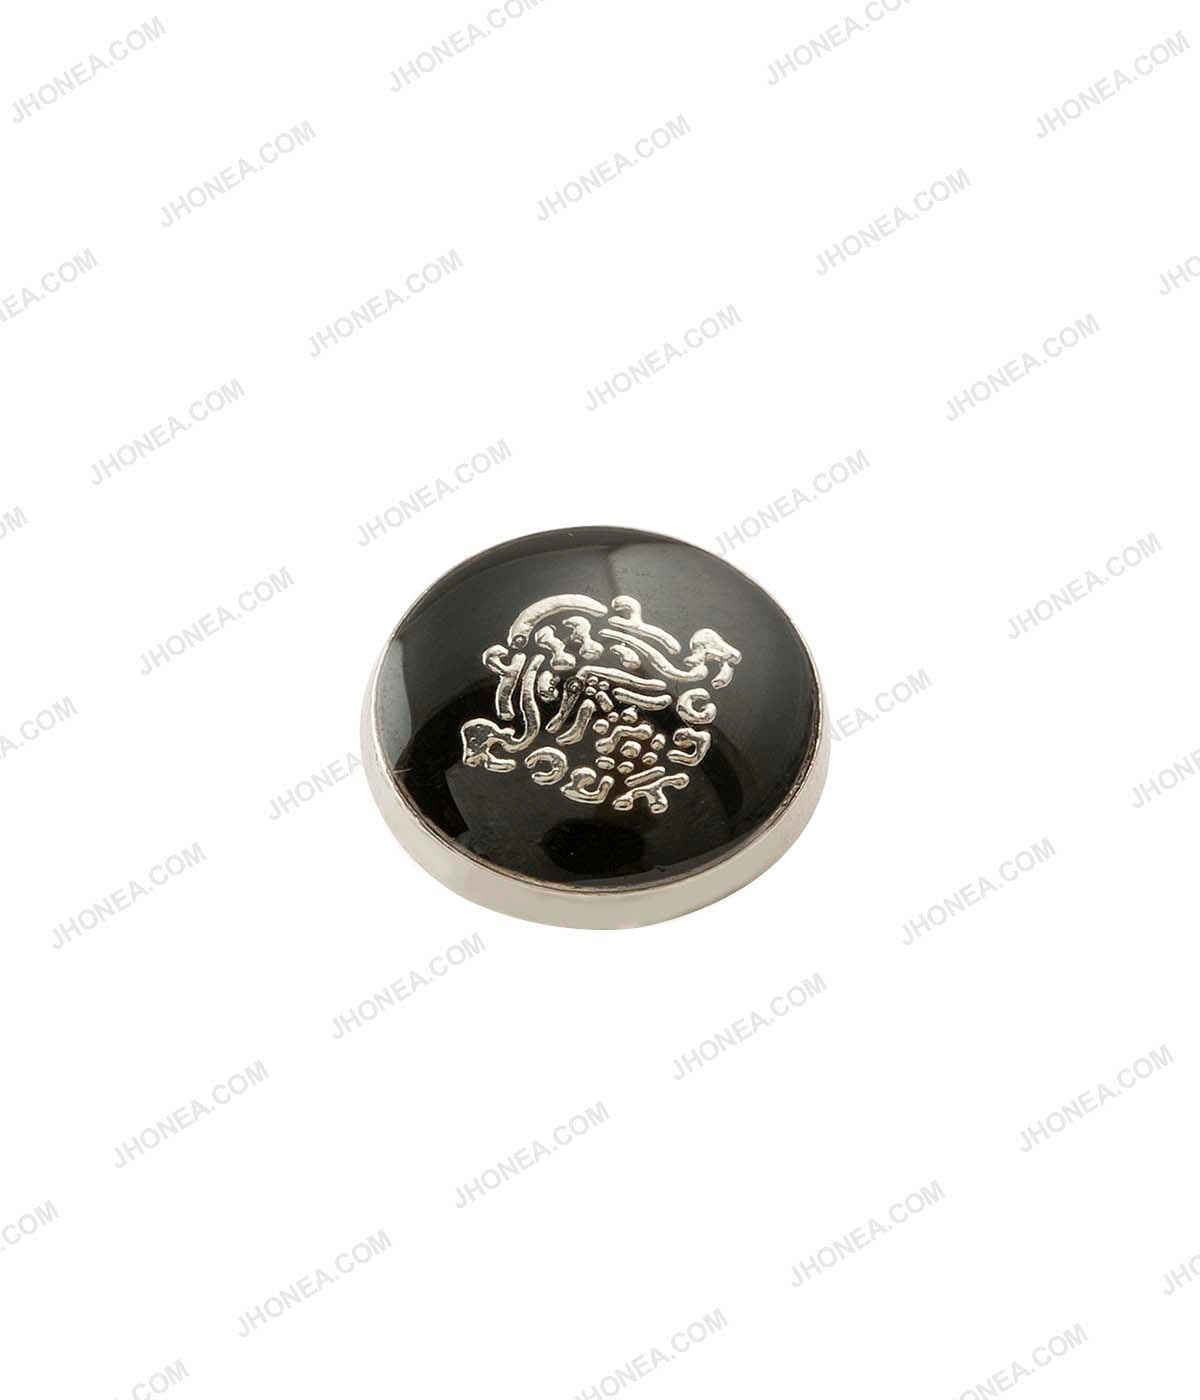 Classy Silver with Black Lamination Metal Buttons for Shirts